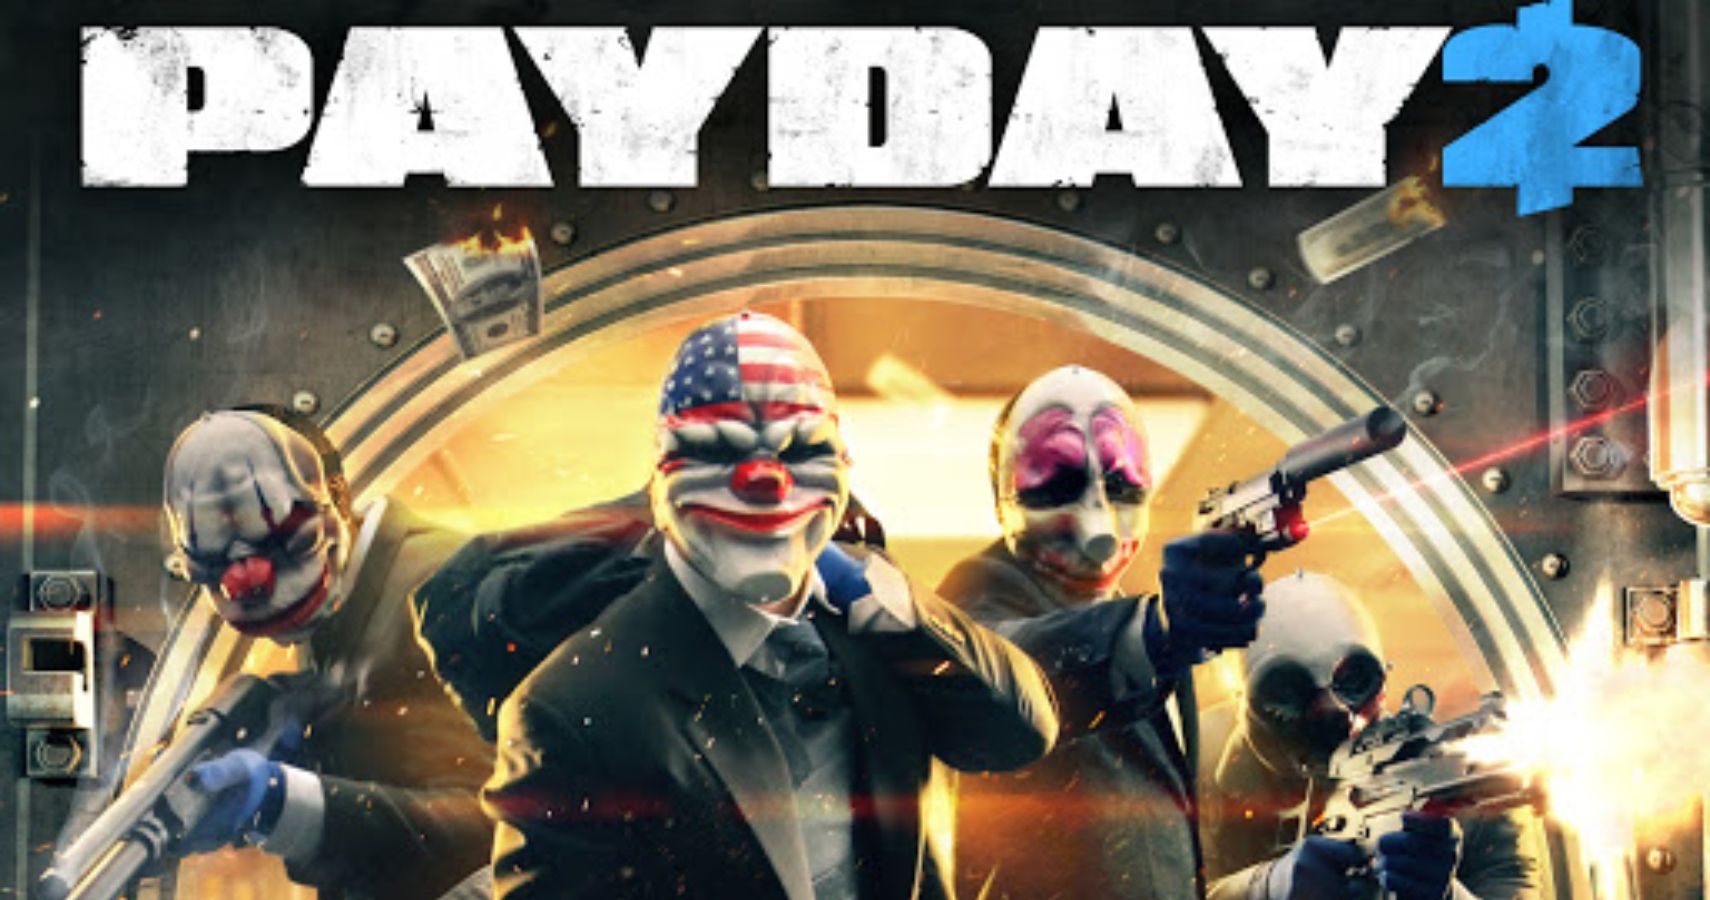 Former Starbreeze CFO Known For Payday 2 Has Been Convicted Of Insider Trading